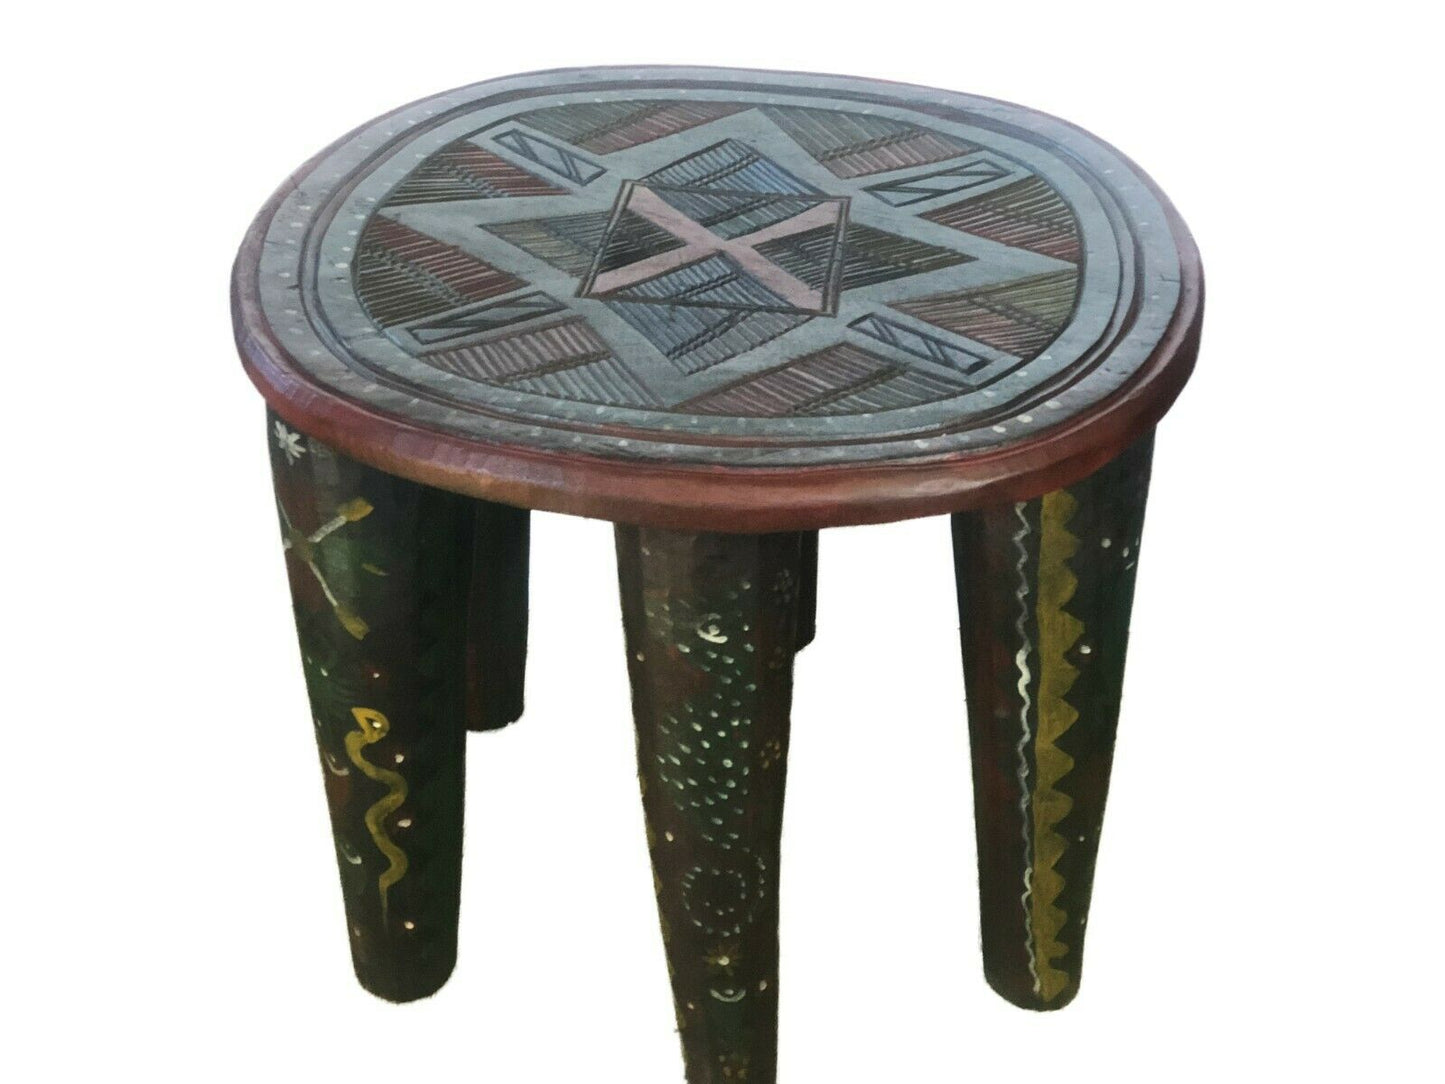 #681 Superb African LG  Nupe Stool / Table Nigeria  20.5" W by 17" H